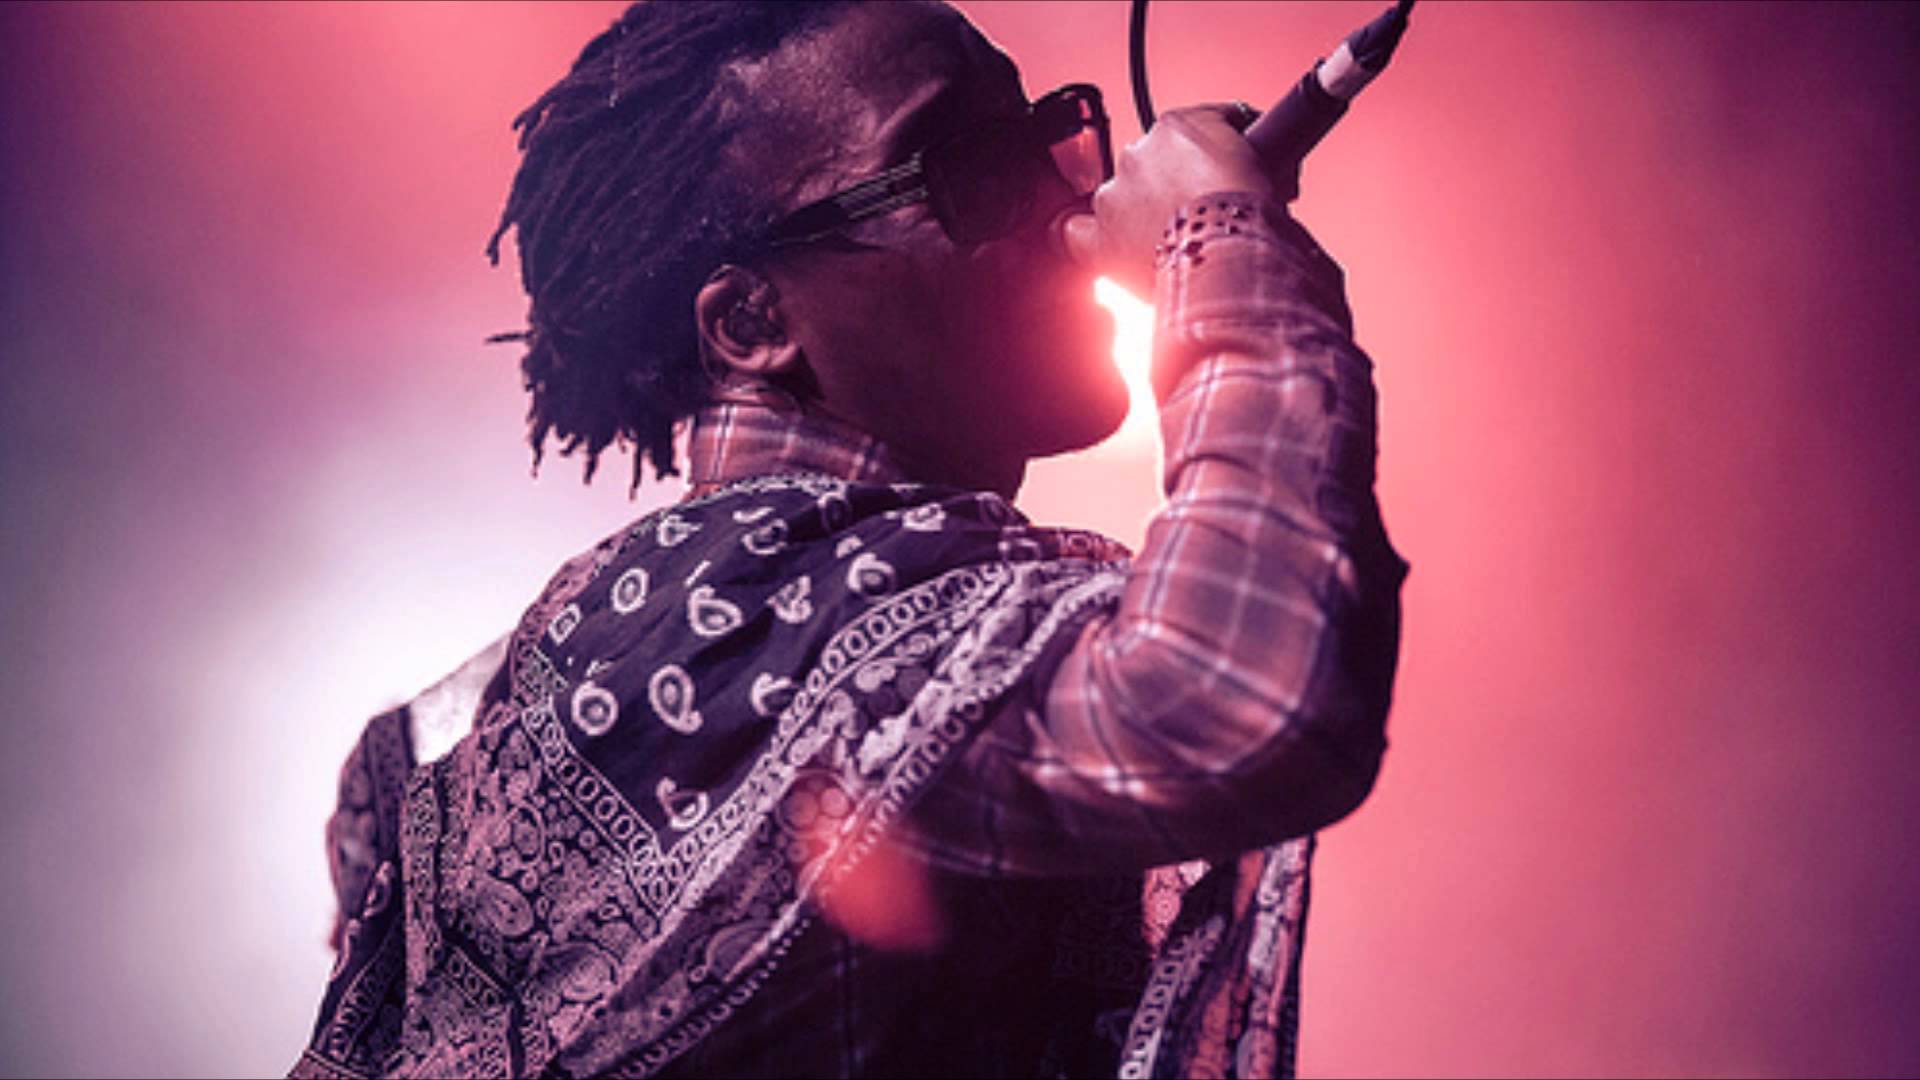 Lupe Fiasco – “Deliver” [New Music] – The Koalition